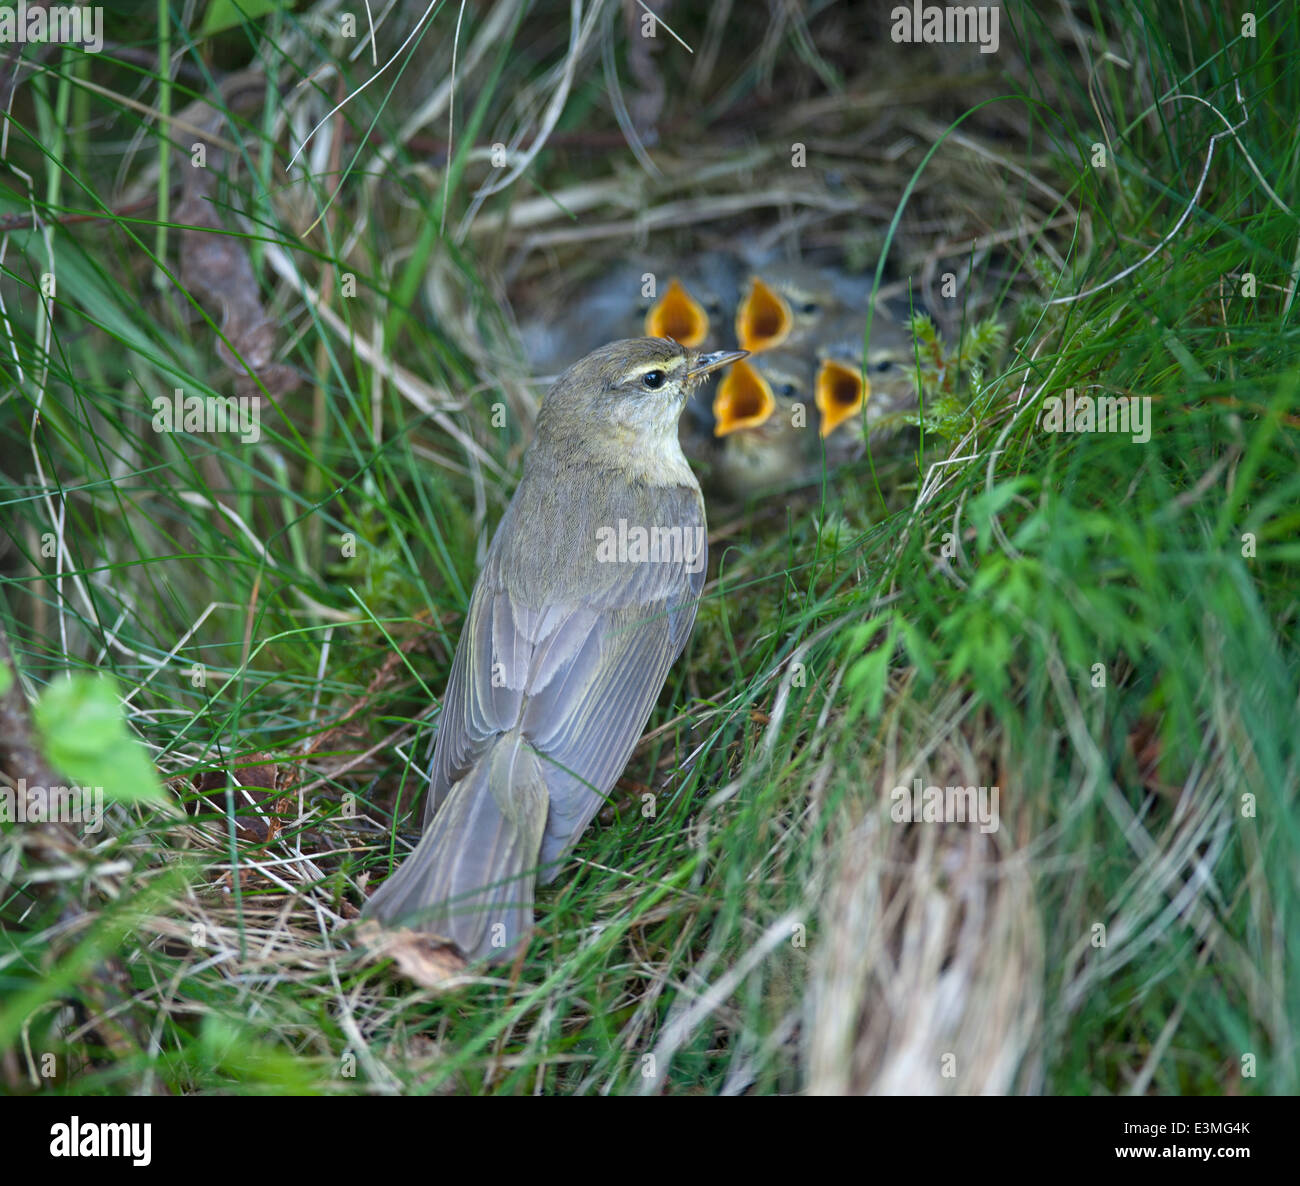 Willow Warbler Family at its summer nest site on a grassy bank in Highland Scotland. SCO 9093. Stock Photo